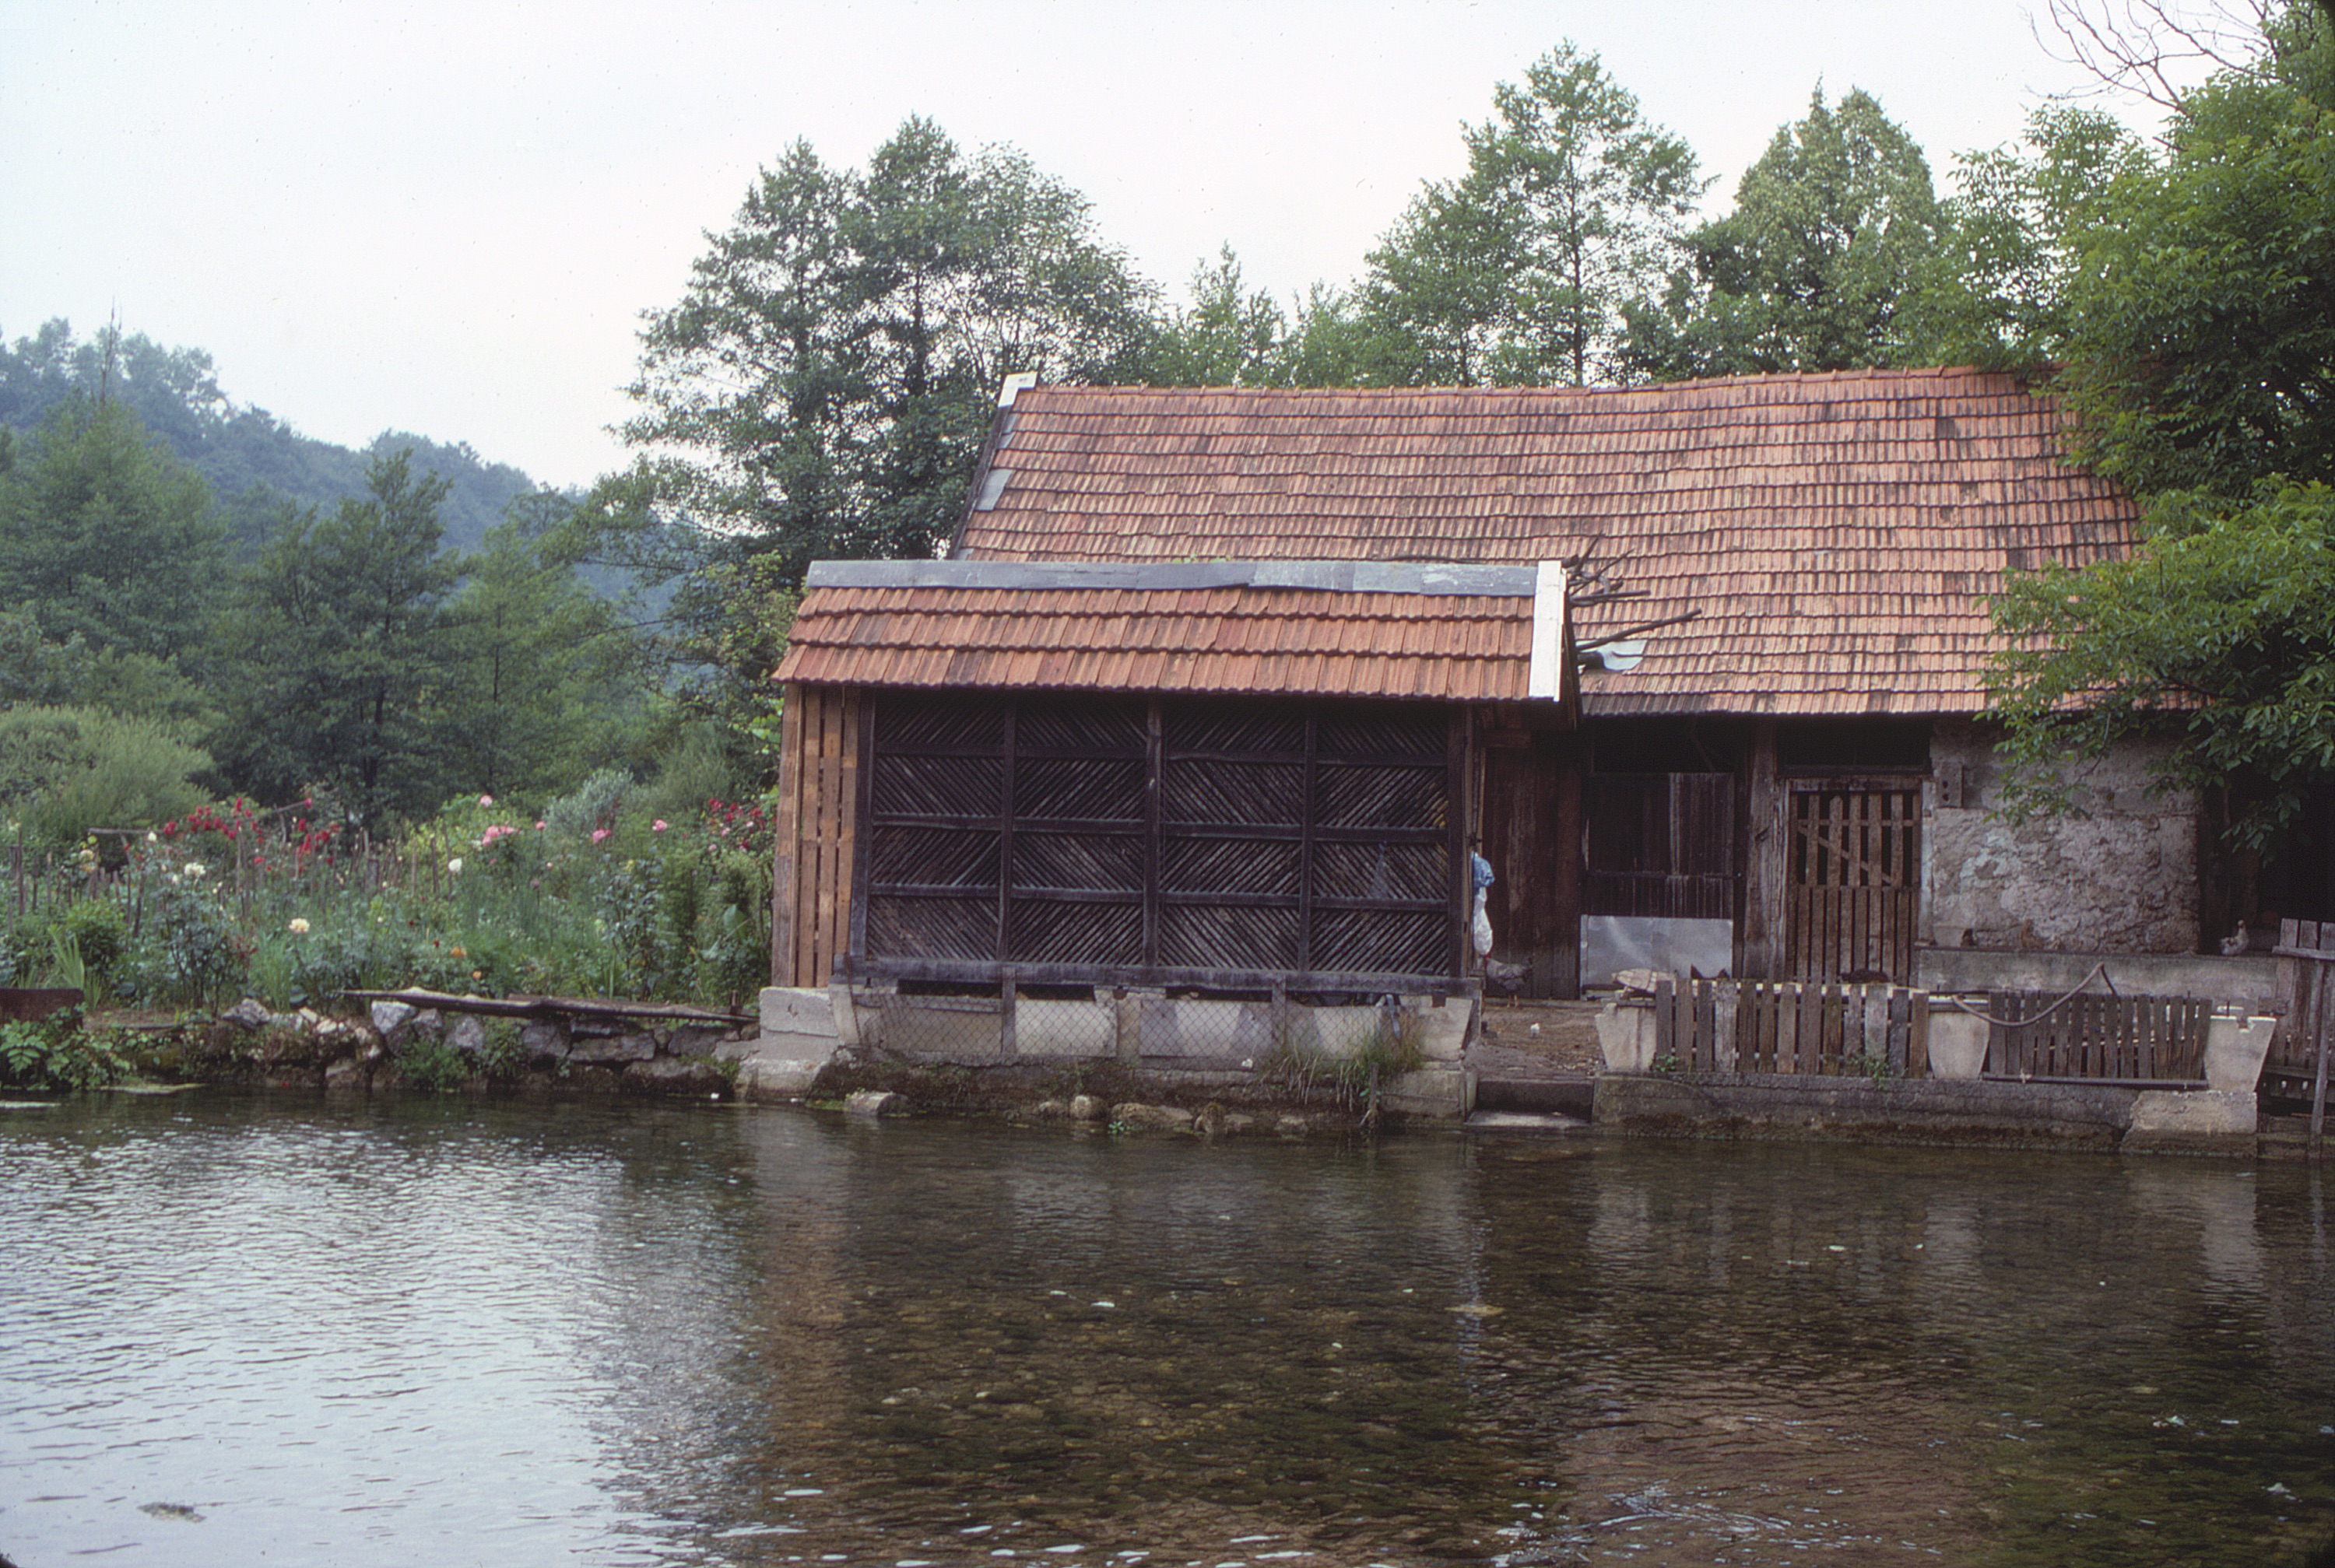 <p>This watermill has several operable openings to chutes that channel water to power the grinding stones within. Beyond the building, which is constructed of stone and wood, the water cascades into the Korana River below.</p>